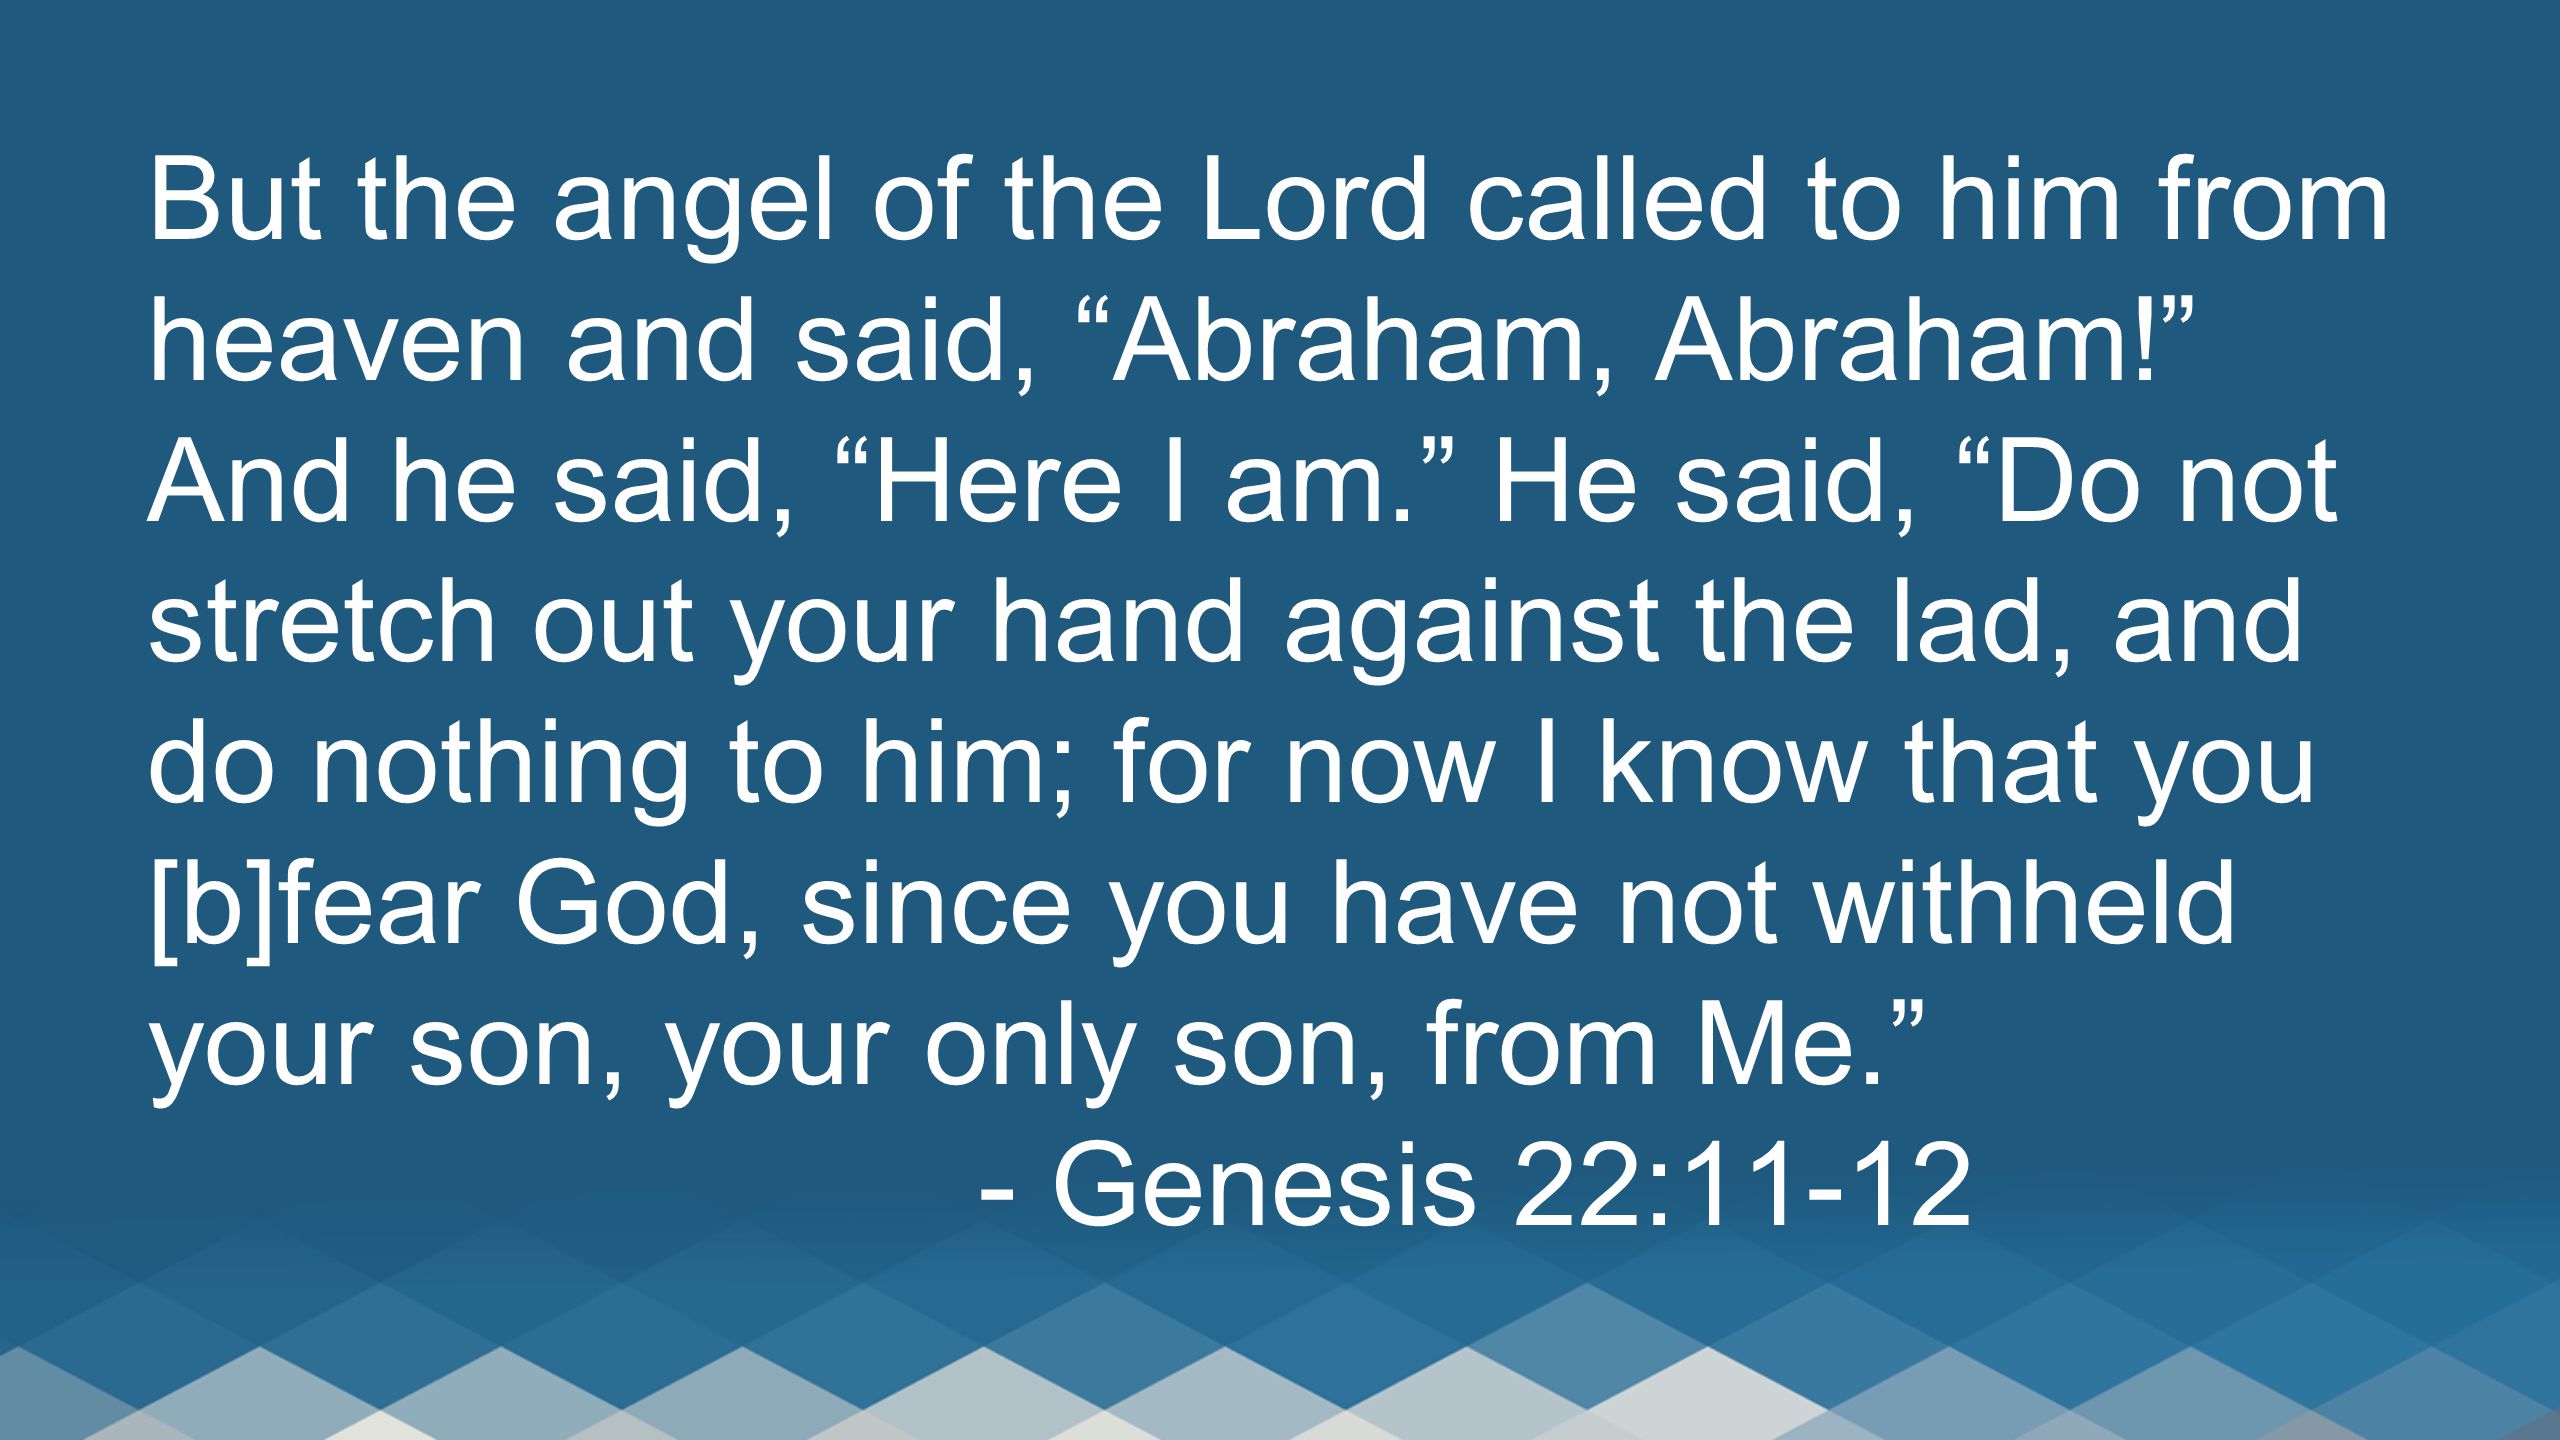 But the angel of the Lord called to him from heaven and said, Abraham, Abraham! And he said, Here I am. He said, Do not stretch out your hand against the lad, and do nothing to him; for now I know that you [b]fear God, since you have not withheld your son, your only son, from Me. - Genesis 22:11-12